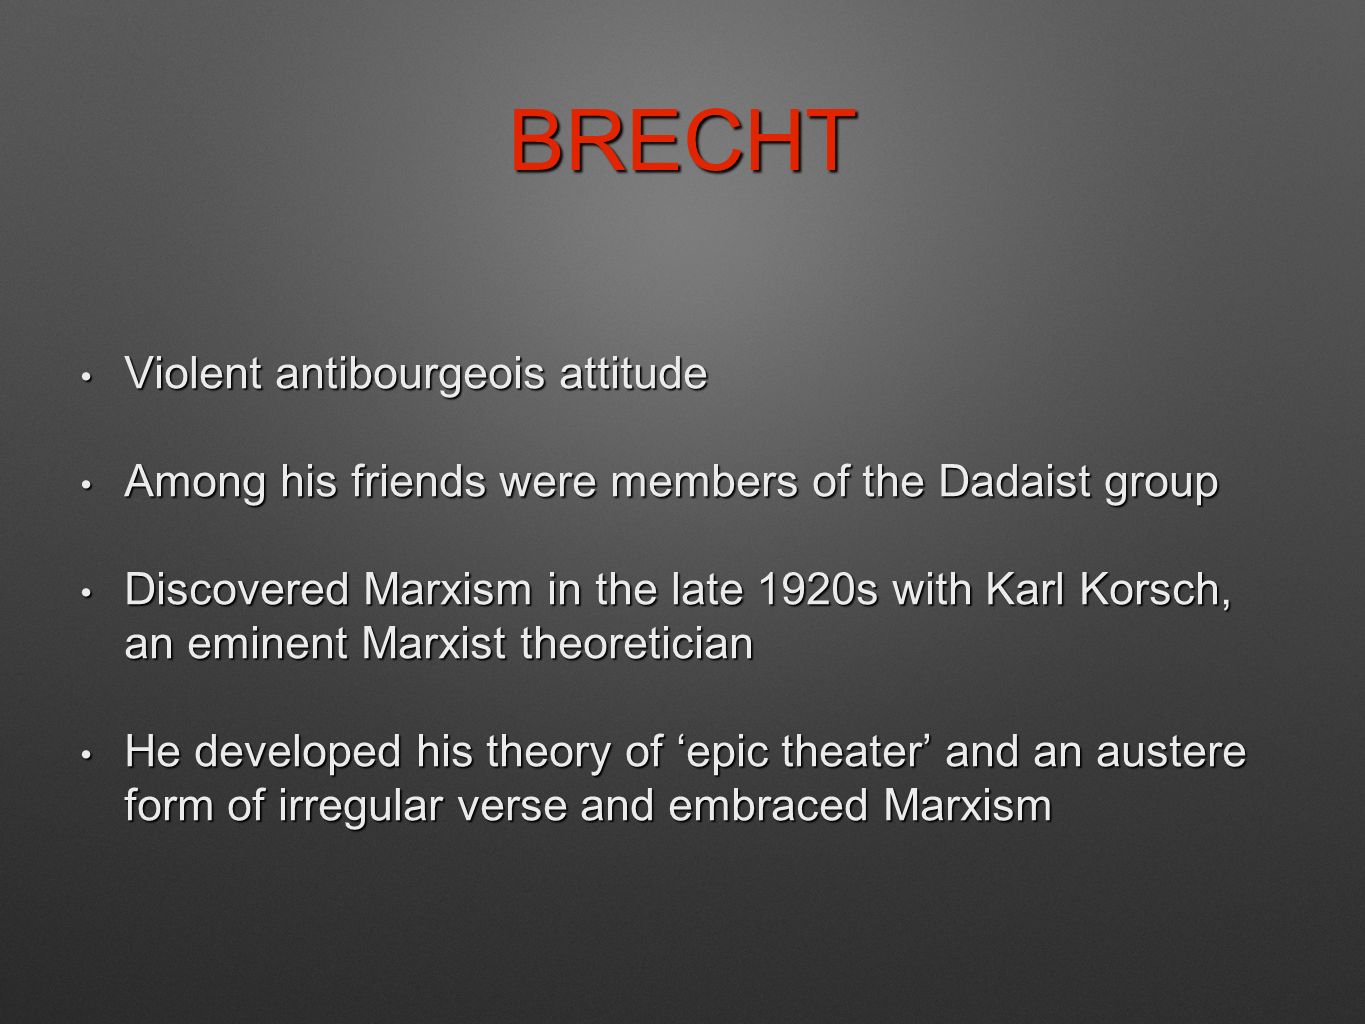 BRECHT Violent antibourgeois attitude Violent antibourgeois attitude Among his friends were members of the Dadaist group Among his friends were members of the Dadaist group Discovered Marxism in the late 1920s with Karl Korsch, an eminent Marxist theoretician Discovered Marxism in the late 1920s with Karl Korsch, an eminent Marxist theoretician He developed his theory of ‘epic theater’ and an austere form of irregular verse and embraced Marxism He developed his theory of ‘epic theater’ and an austere form of irregular verse and embraced Marxism